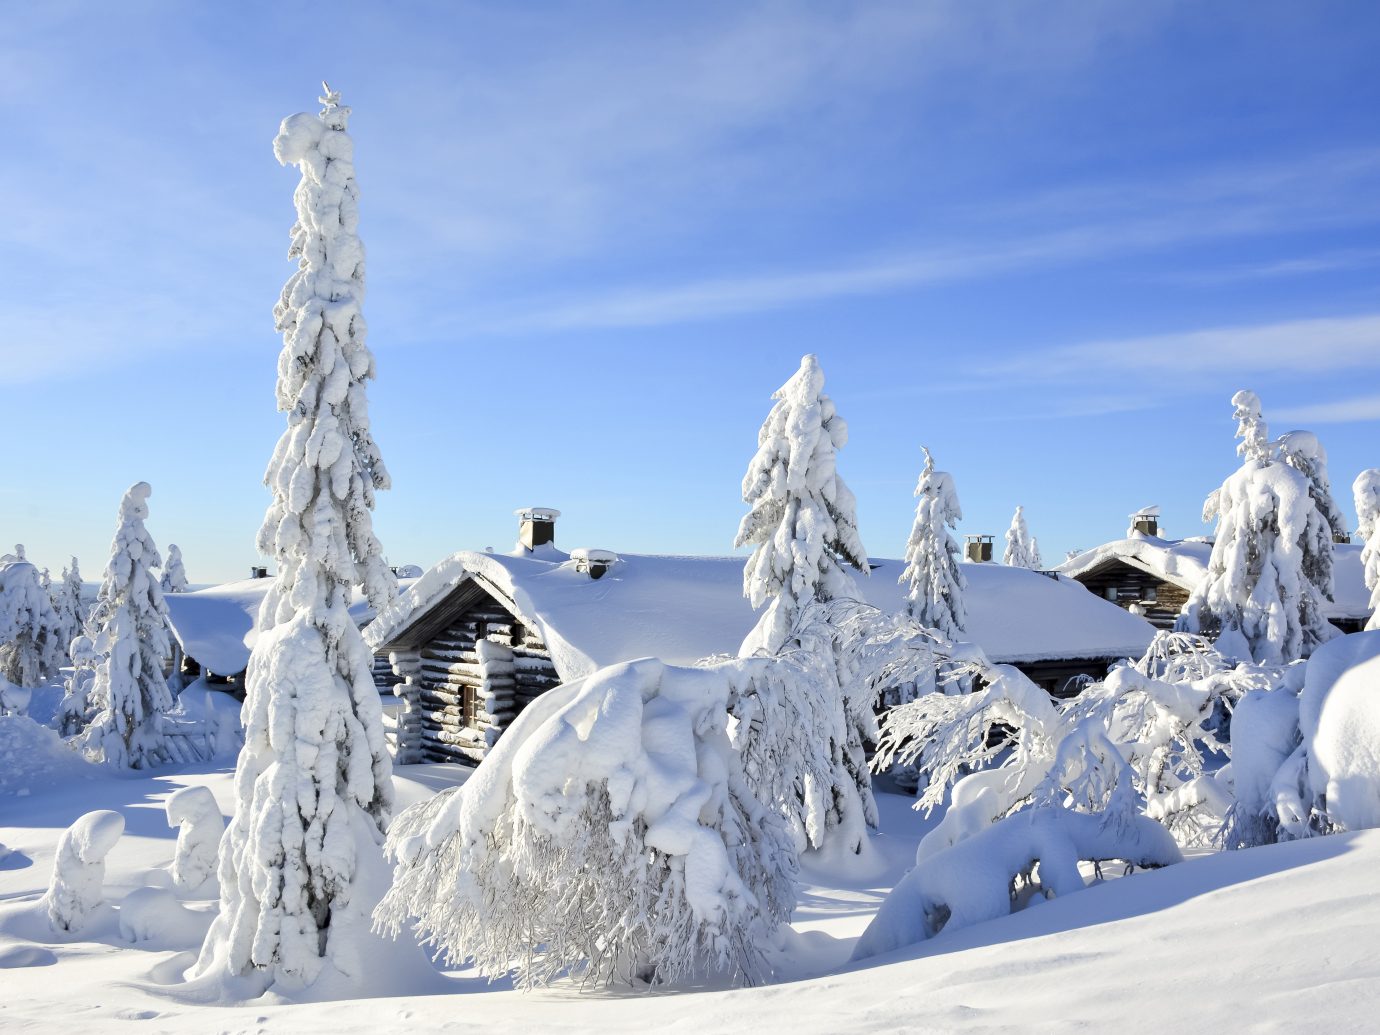 Cottages on snowy mountain on a sunny cold winter day on tourist resort in Lapland Finland.